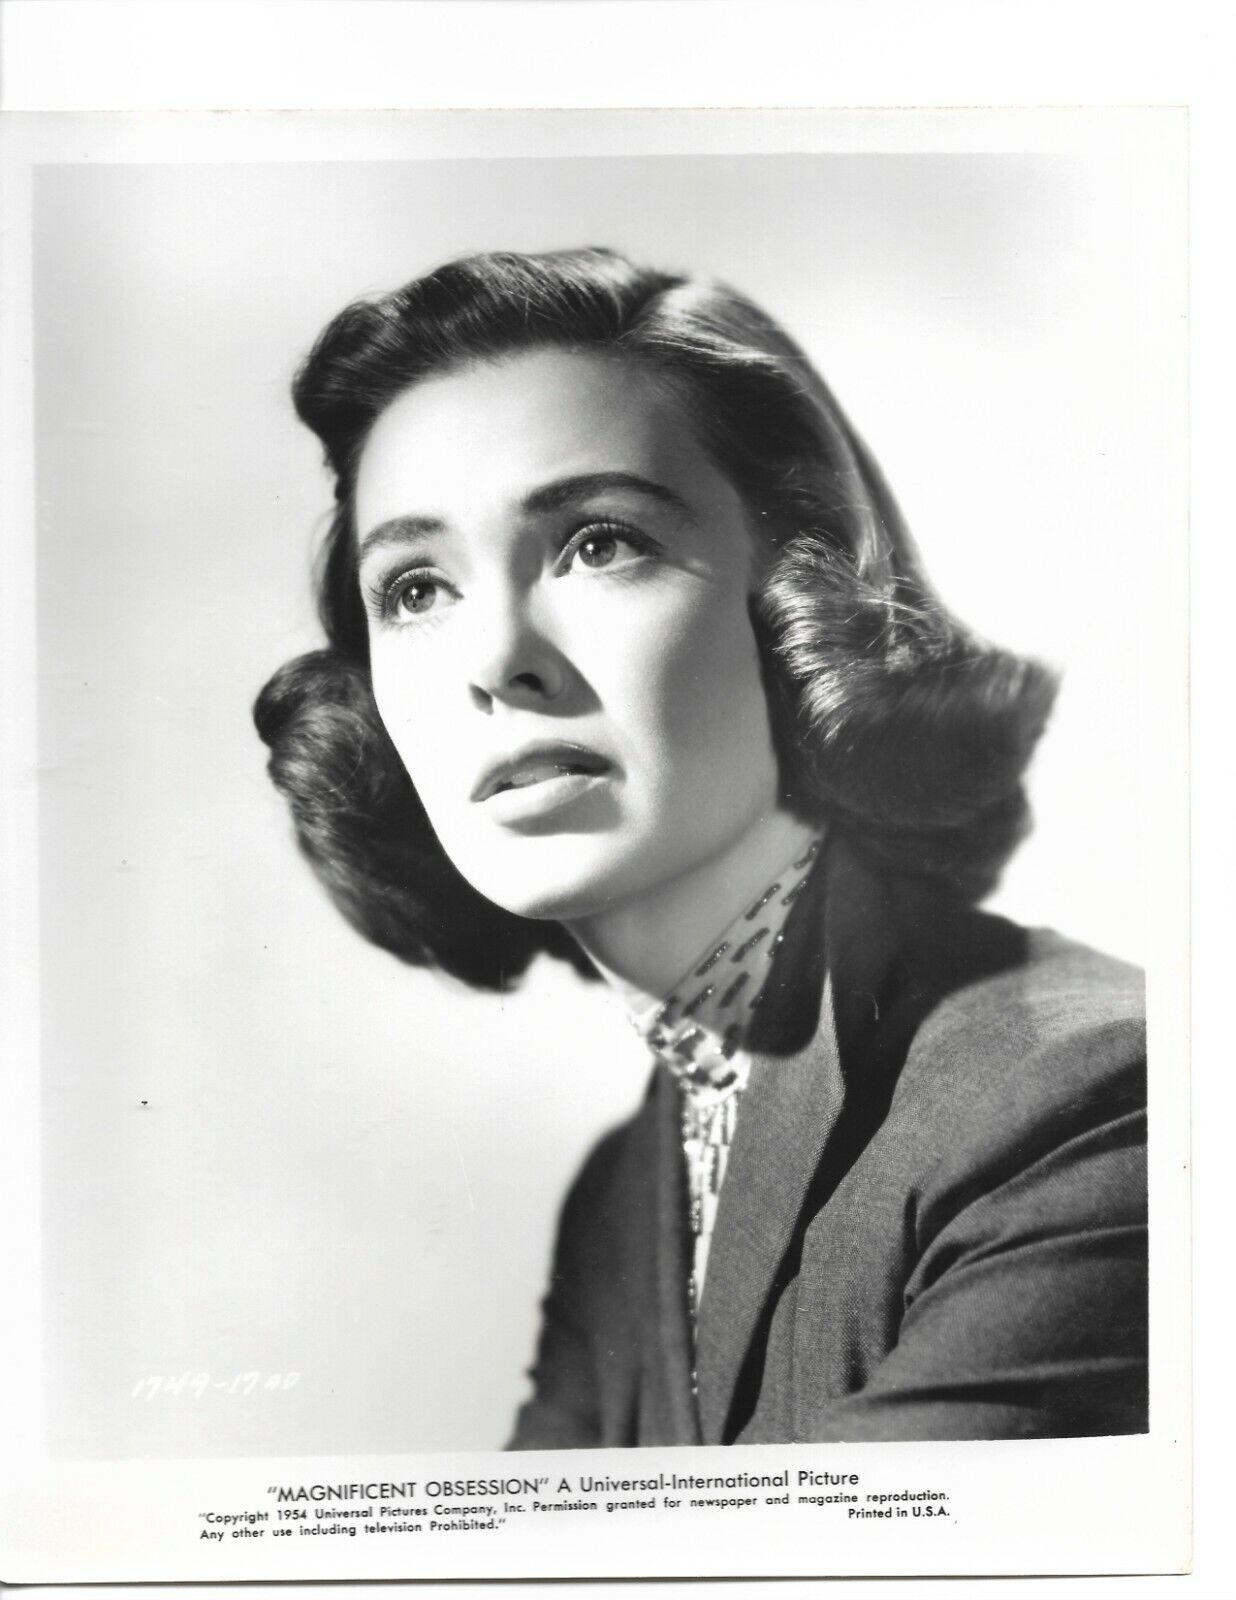 BARBARA RUSH LOVELY PORTRAIT IN Magnificent Obsession 1958 ORIG VINTAGE PHOTO 93